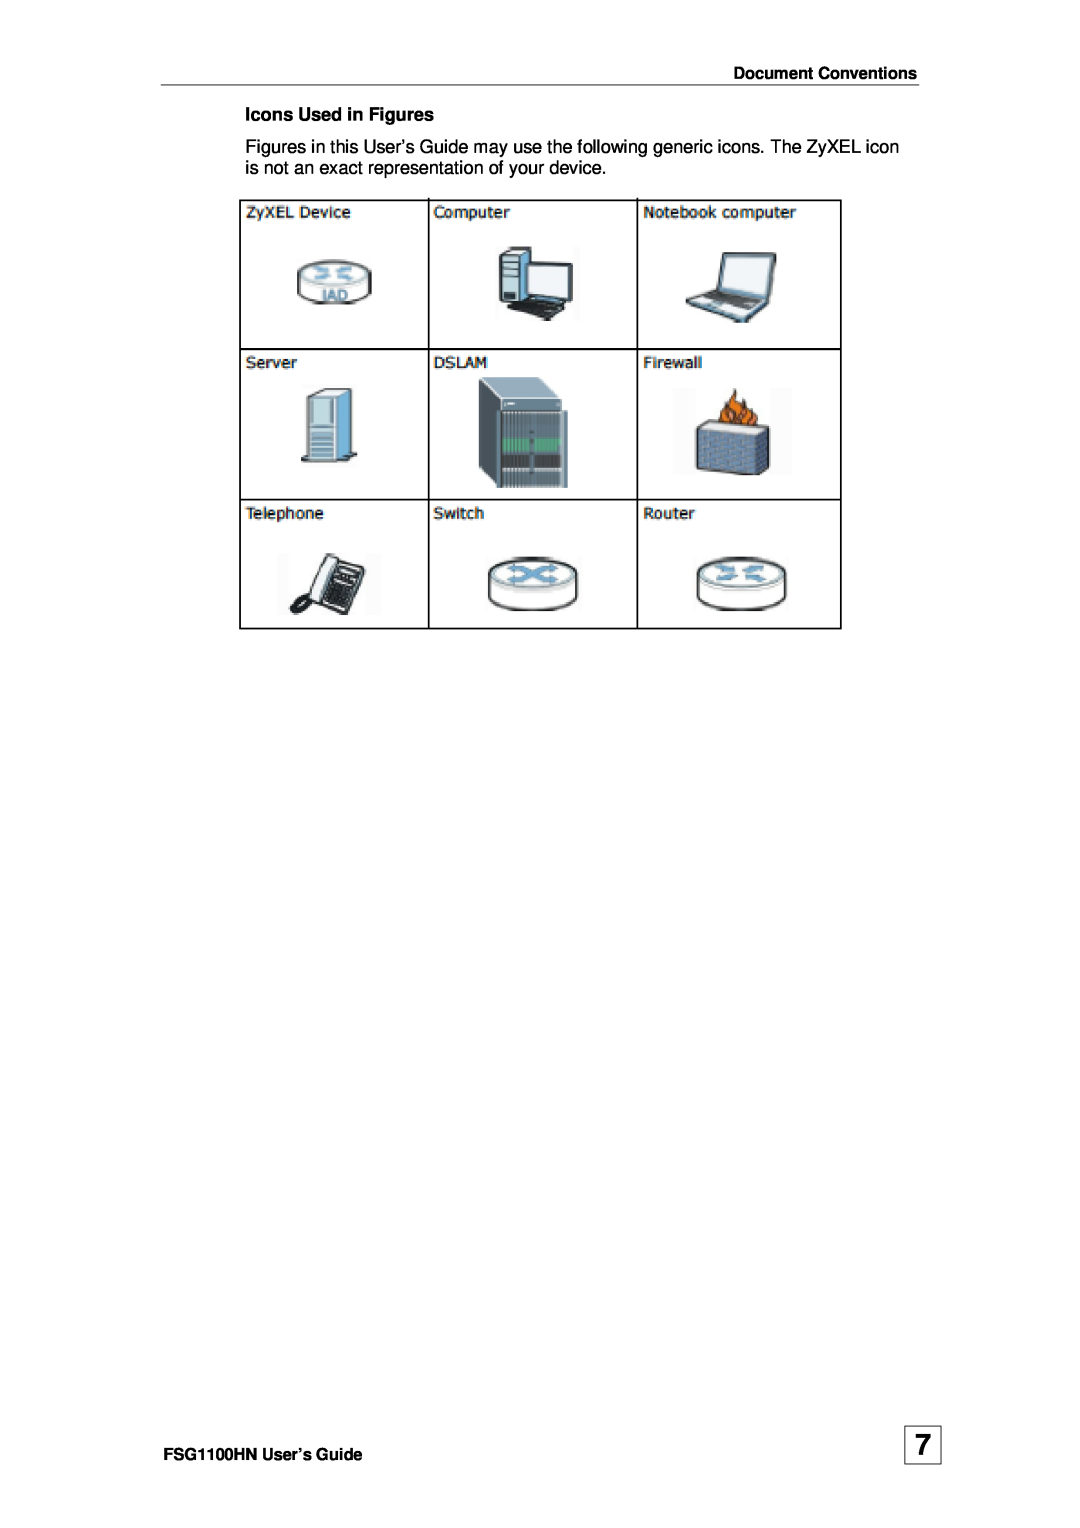 ZyXEL Communications wireless active fiber router Icons Used in Figures, Document Conventions, FSG1100HN User’s Guide 